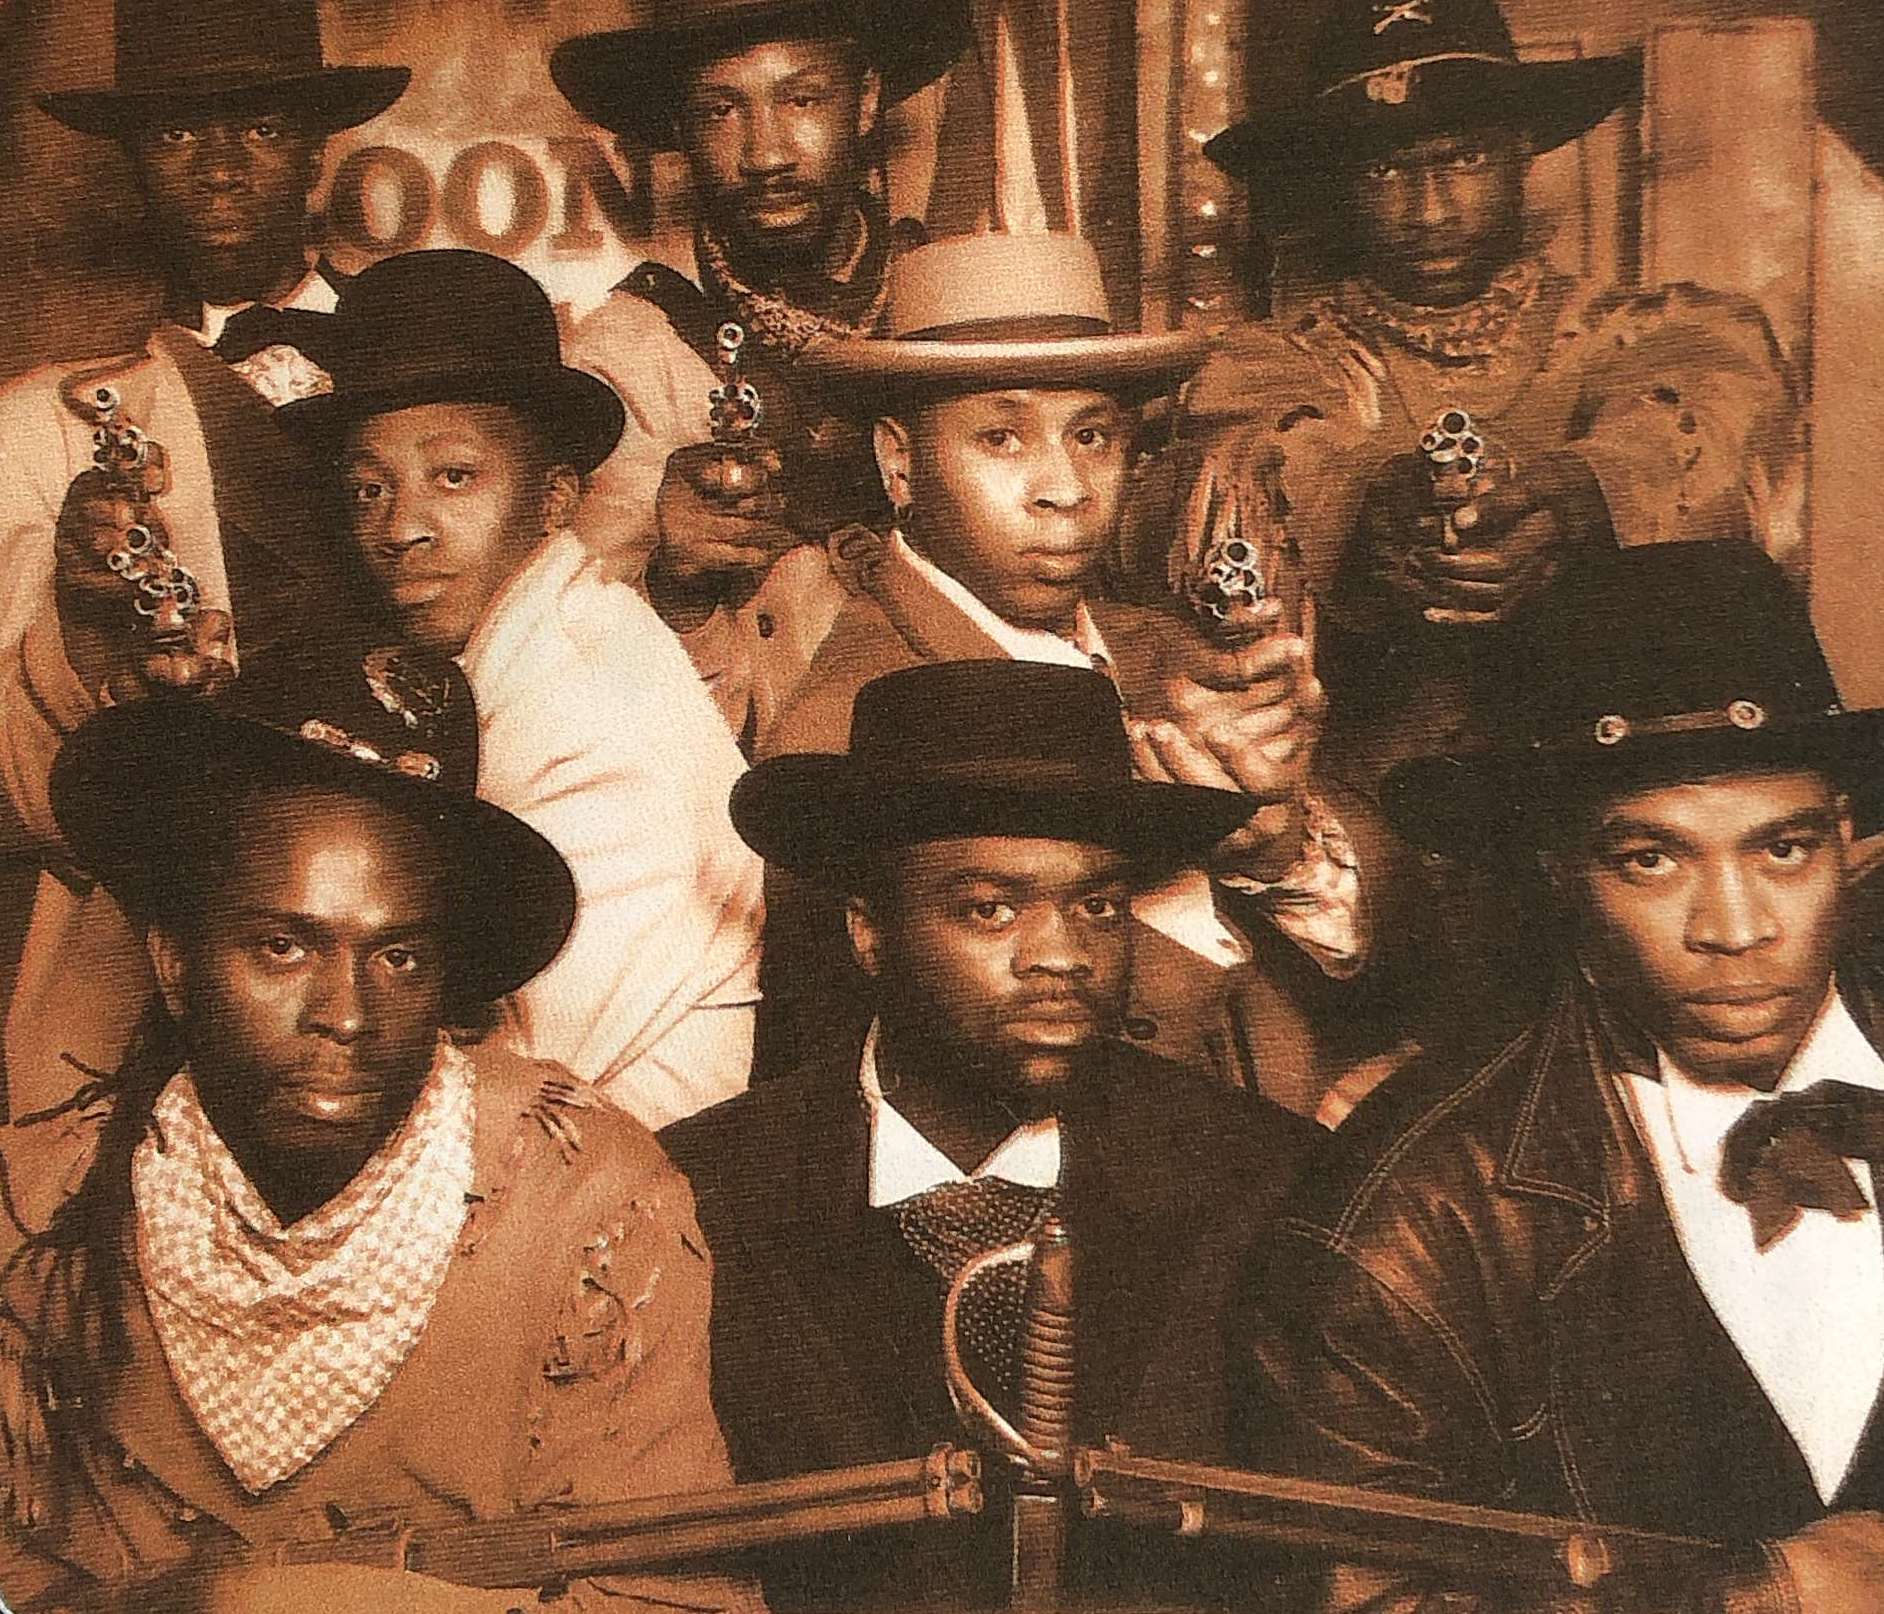 Top row L-R: Robbie Gee, Brian Bovell and Sylvester Williams Middle row L-R: Michael Buffong and Roger Griffiths Bottom row L-R: Victor Romero Evans, Eddie Nestor and Gary McDonald ARMED AND DANGEROUS written and performed by The Posse, 1992